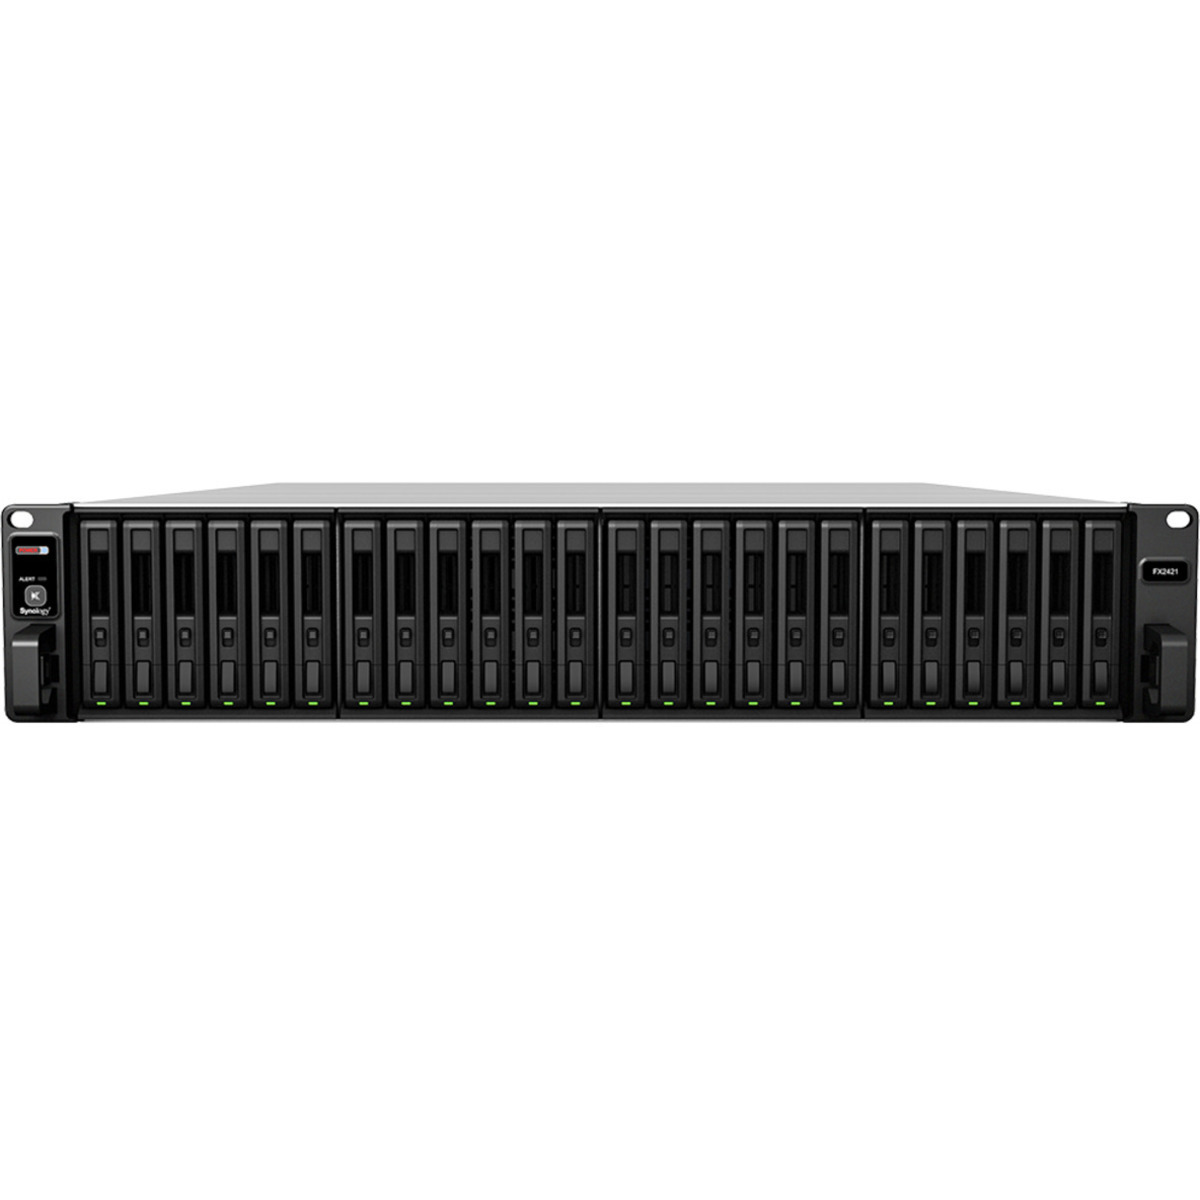 Synology FX2421 External Expansion Drive 184tb 24-Bay RackMount Large Business / Enterprise Expansion Enclosure 23x8tb TeamGroup EX2 Elite T253E2008T0C101 2.5 550/520MB/s SATA 6Gb/s SSD CONSUMER Class Drives Installed - Burn-In Tested FX2421 External Expansion Drive